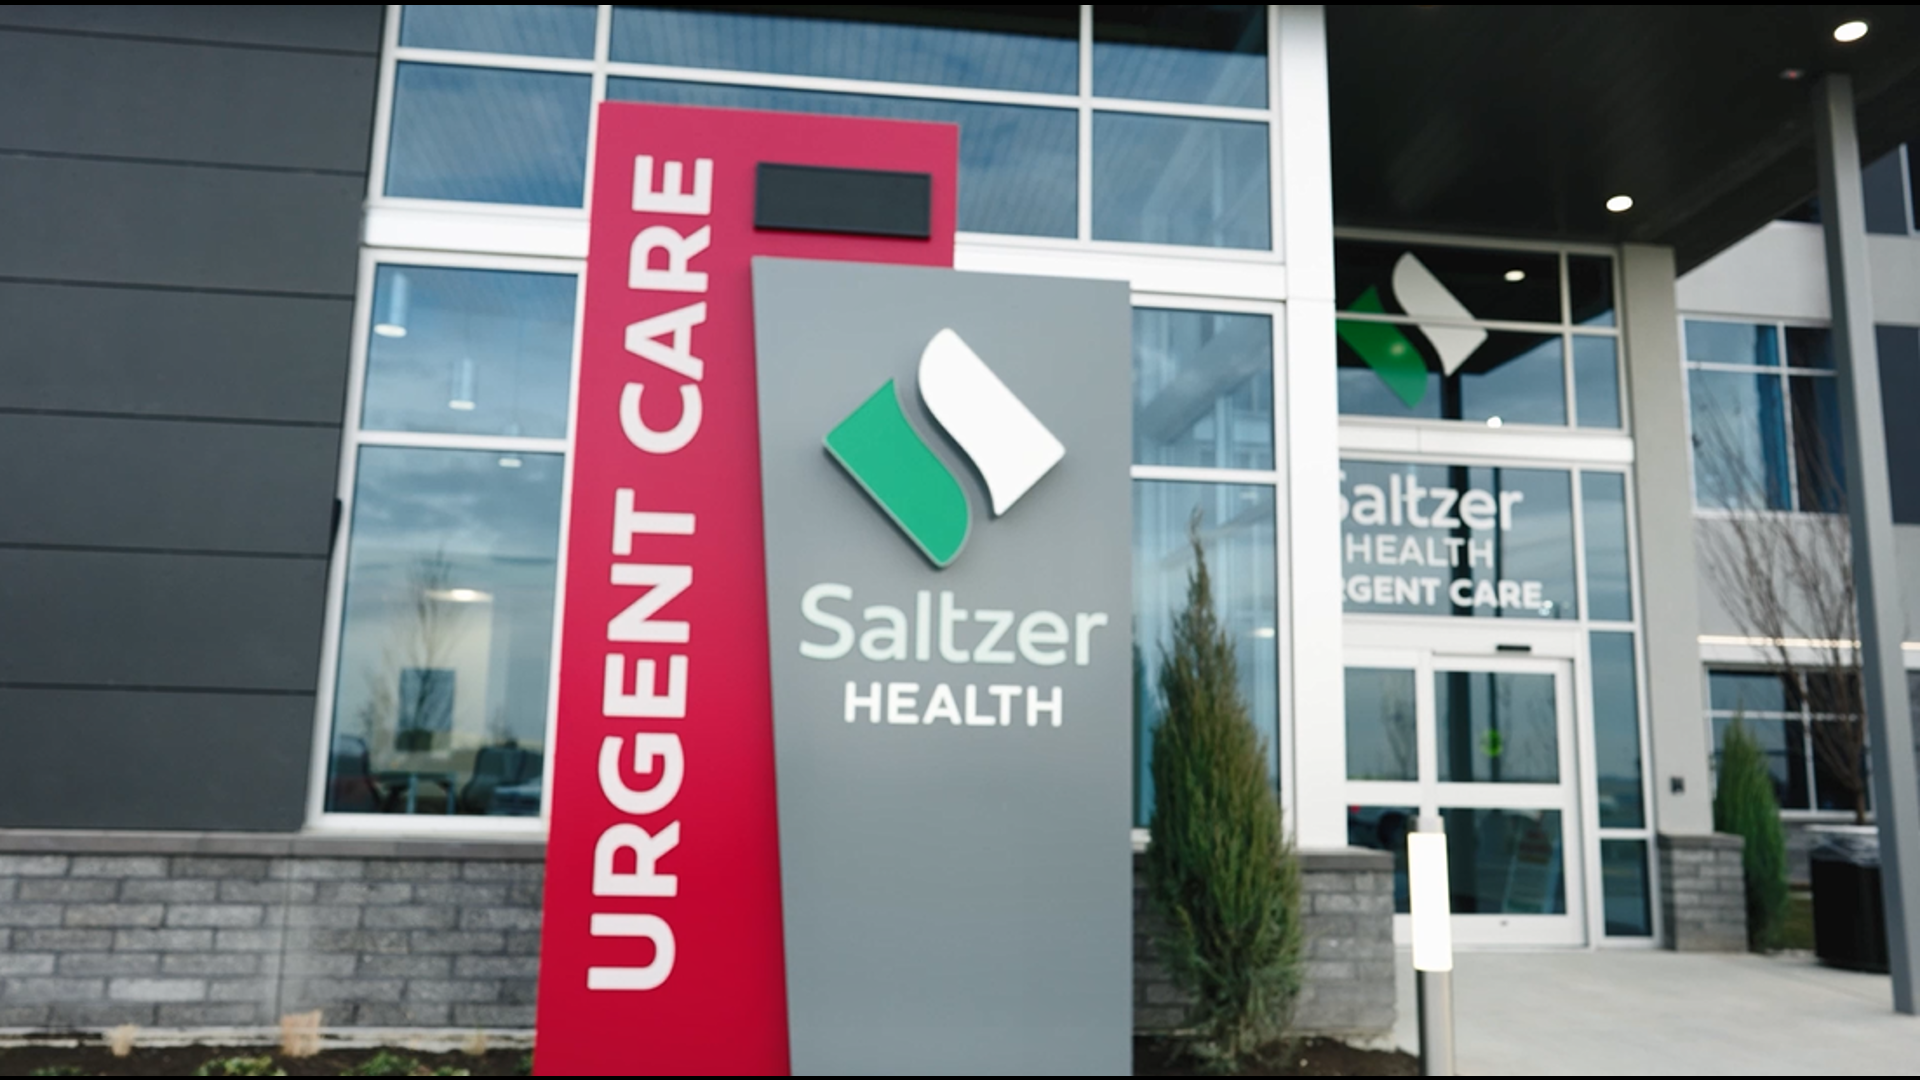 Saltzer Health Urgent Care at Ten Mile is the first 24/7 urgent care in the state of Idaho. Now Open!